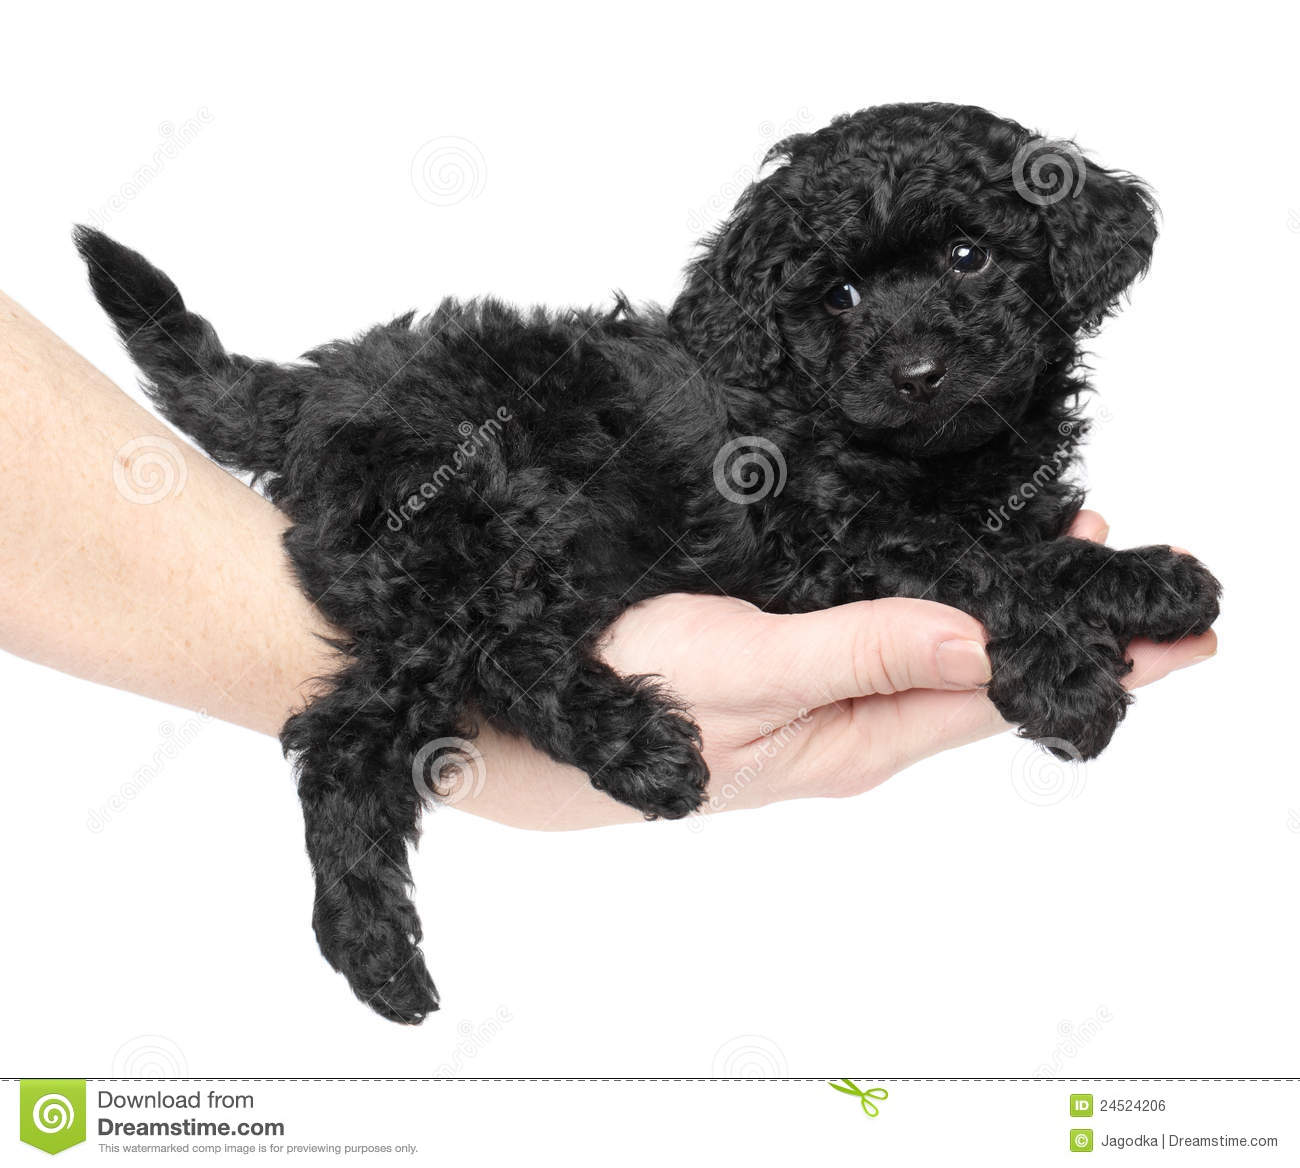 Black Toy Poodle Puppy On Hand  Royalty Free Stock Image   Image